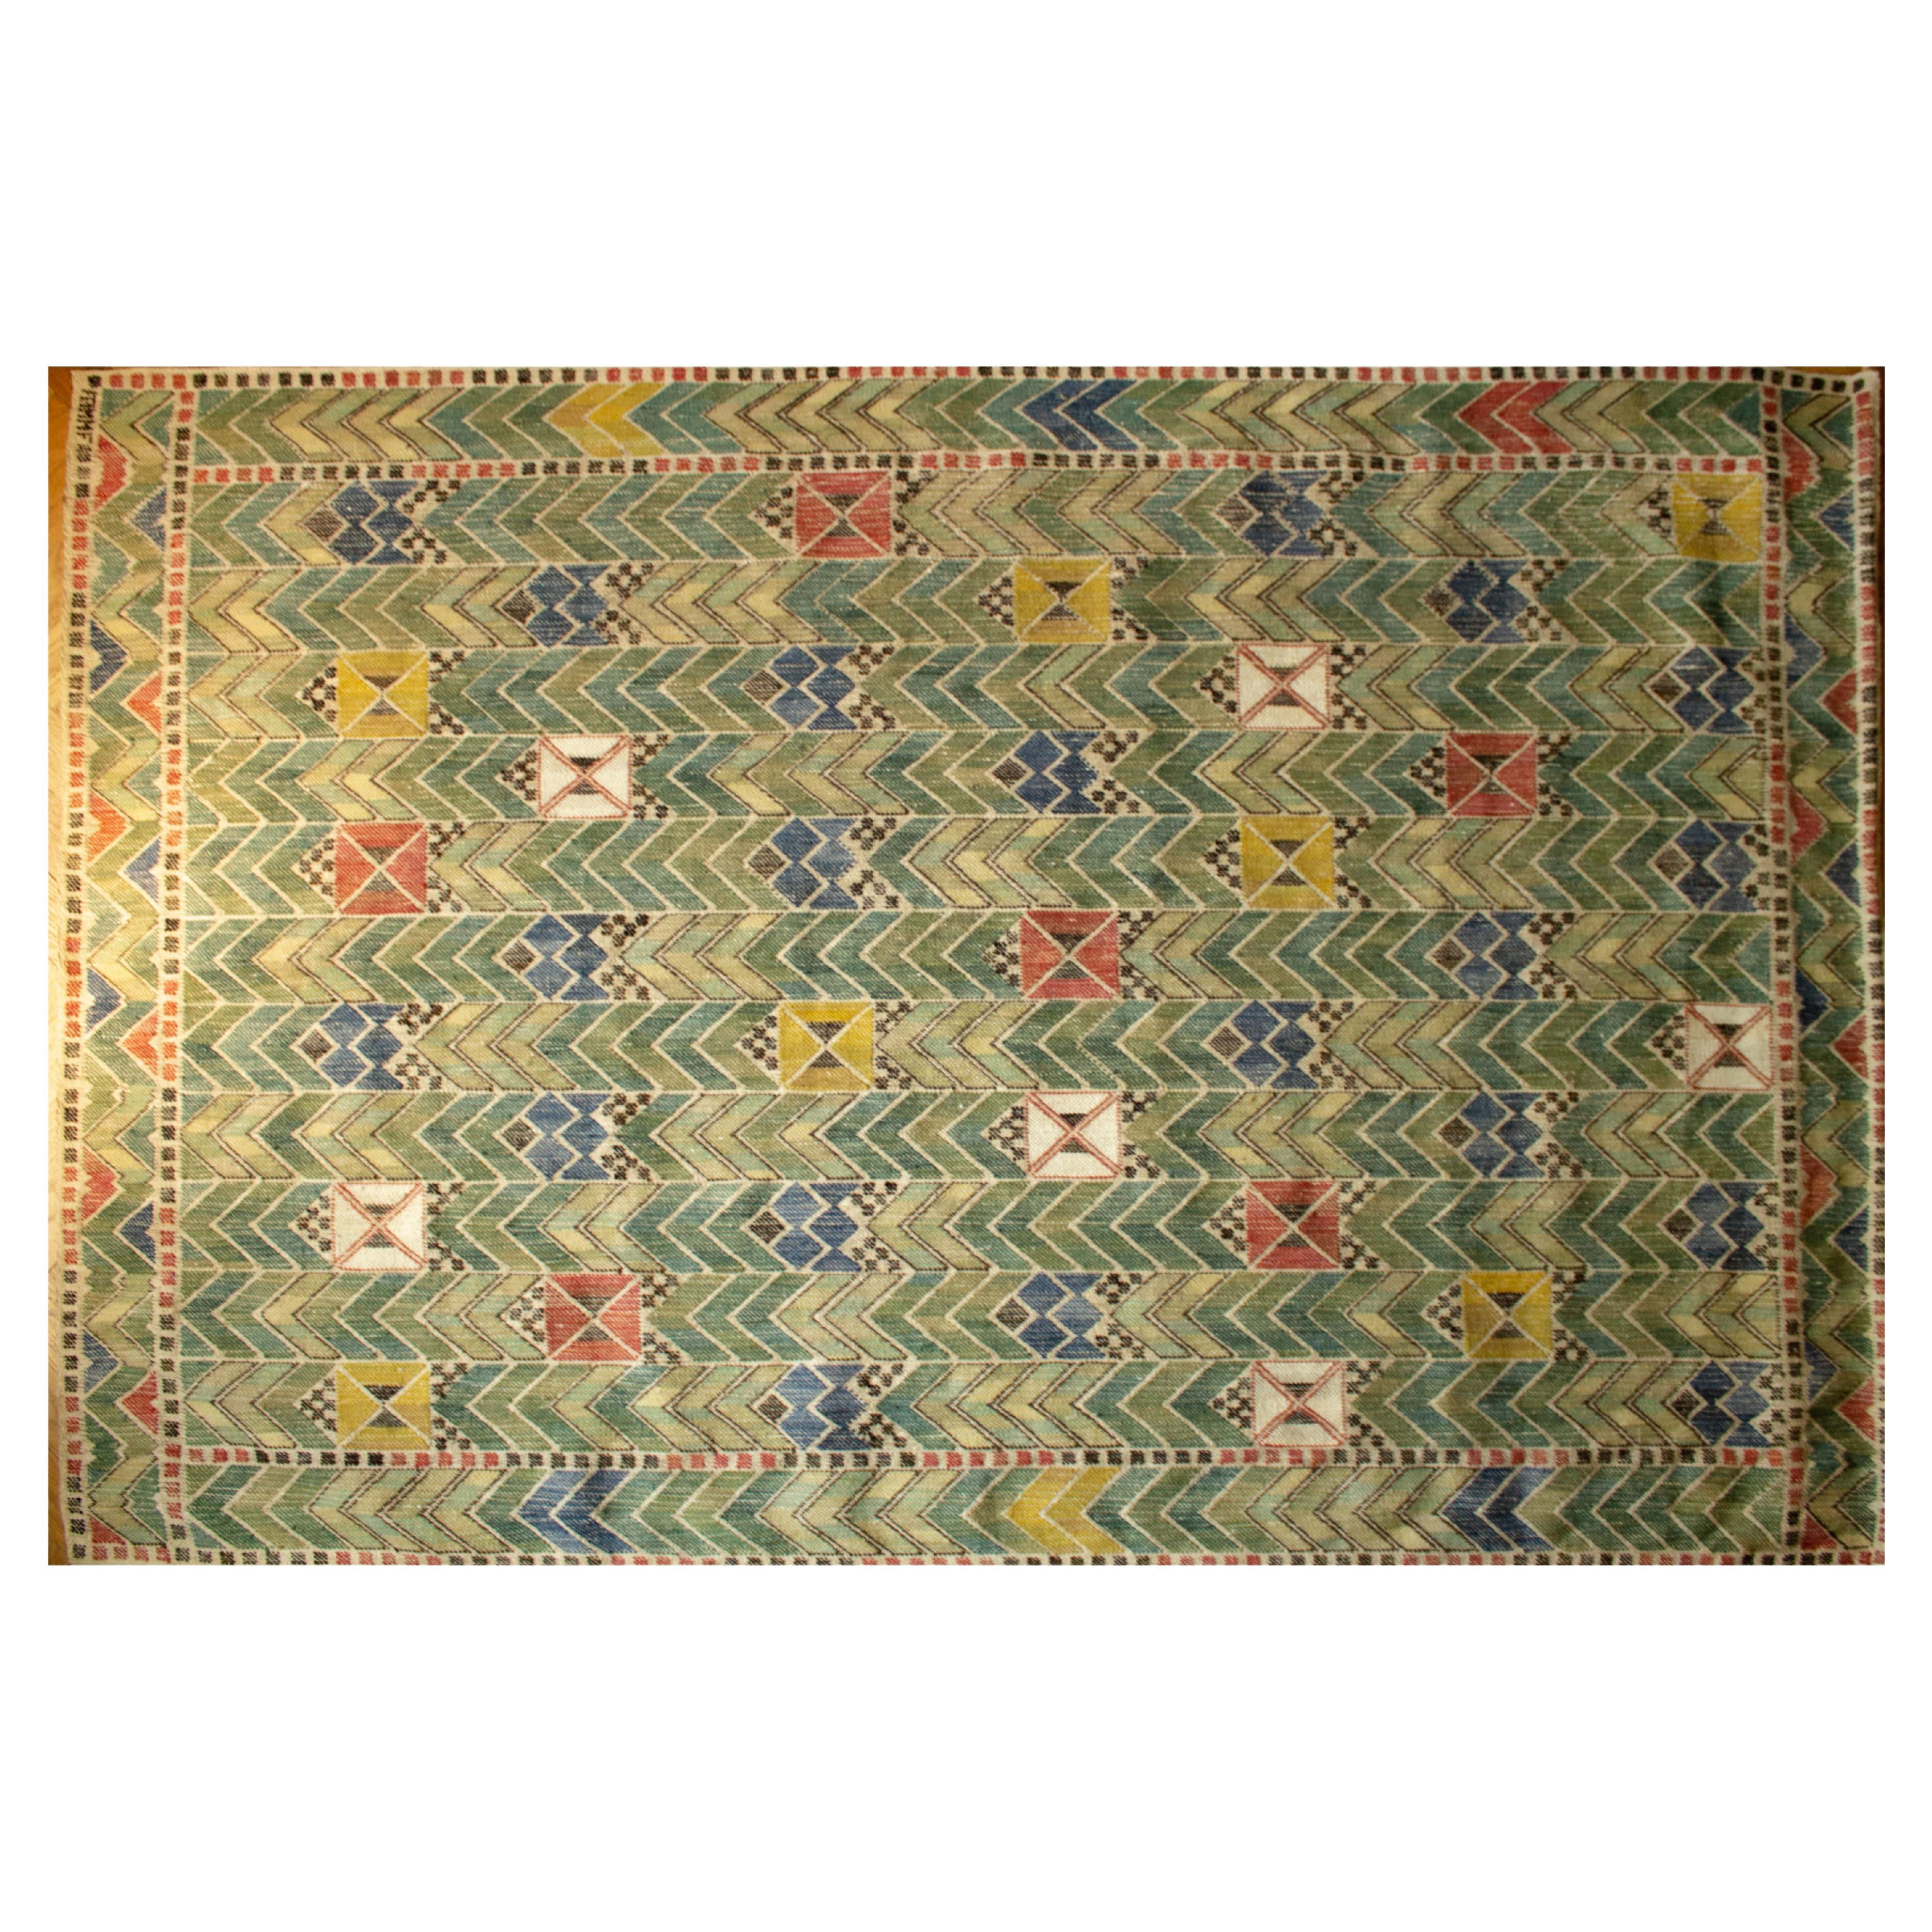 Exhibited, vintage wall tapestry by one of the most famous Swedish designers Märta Måås-Fjetterström. Made at her studio in the 1990s. The pattern 